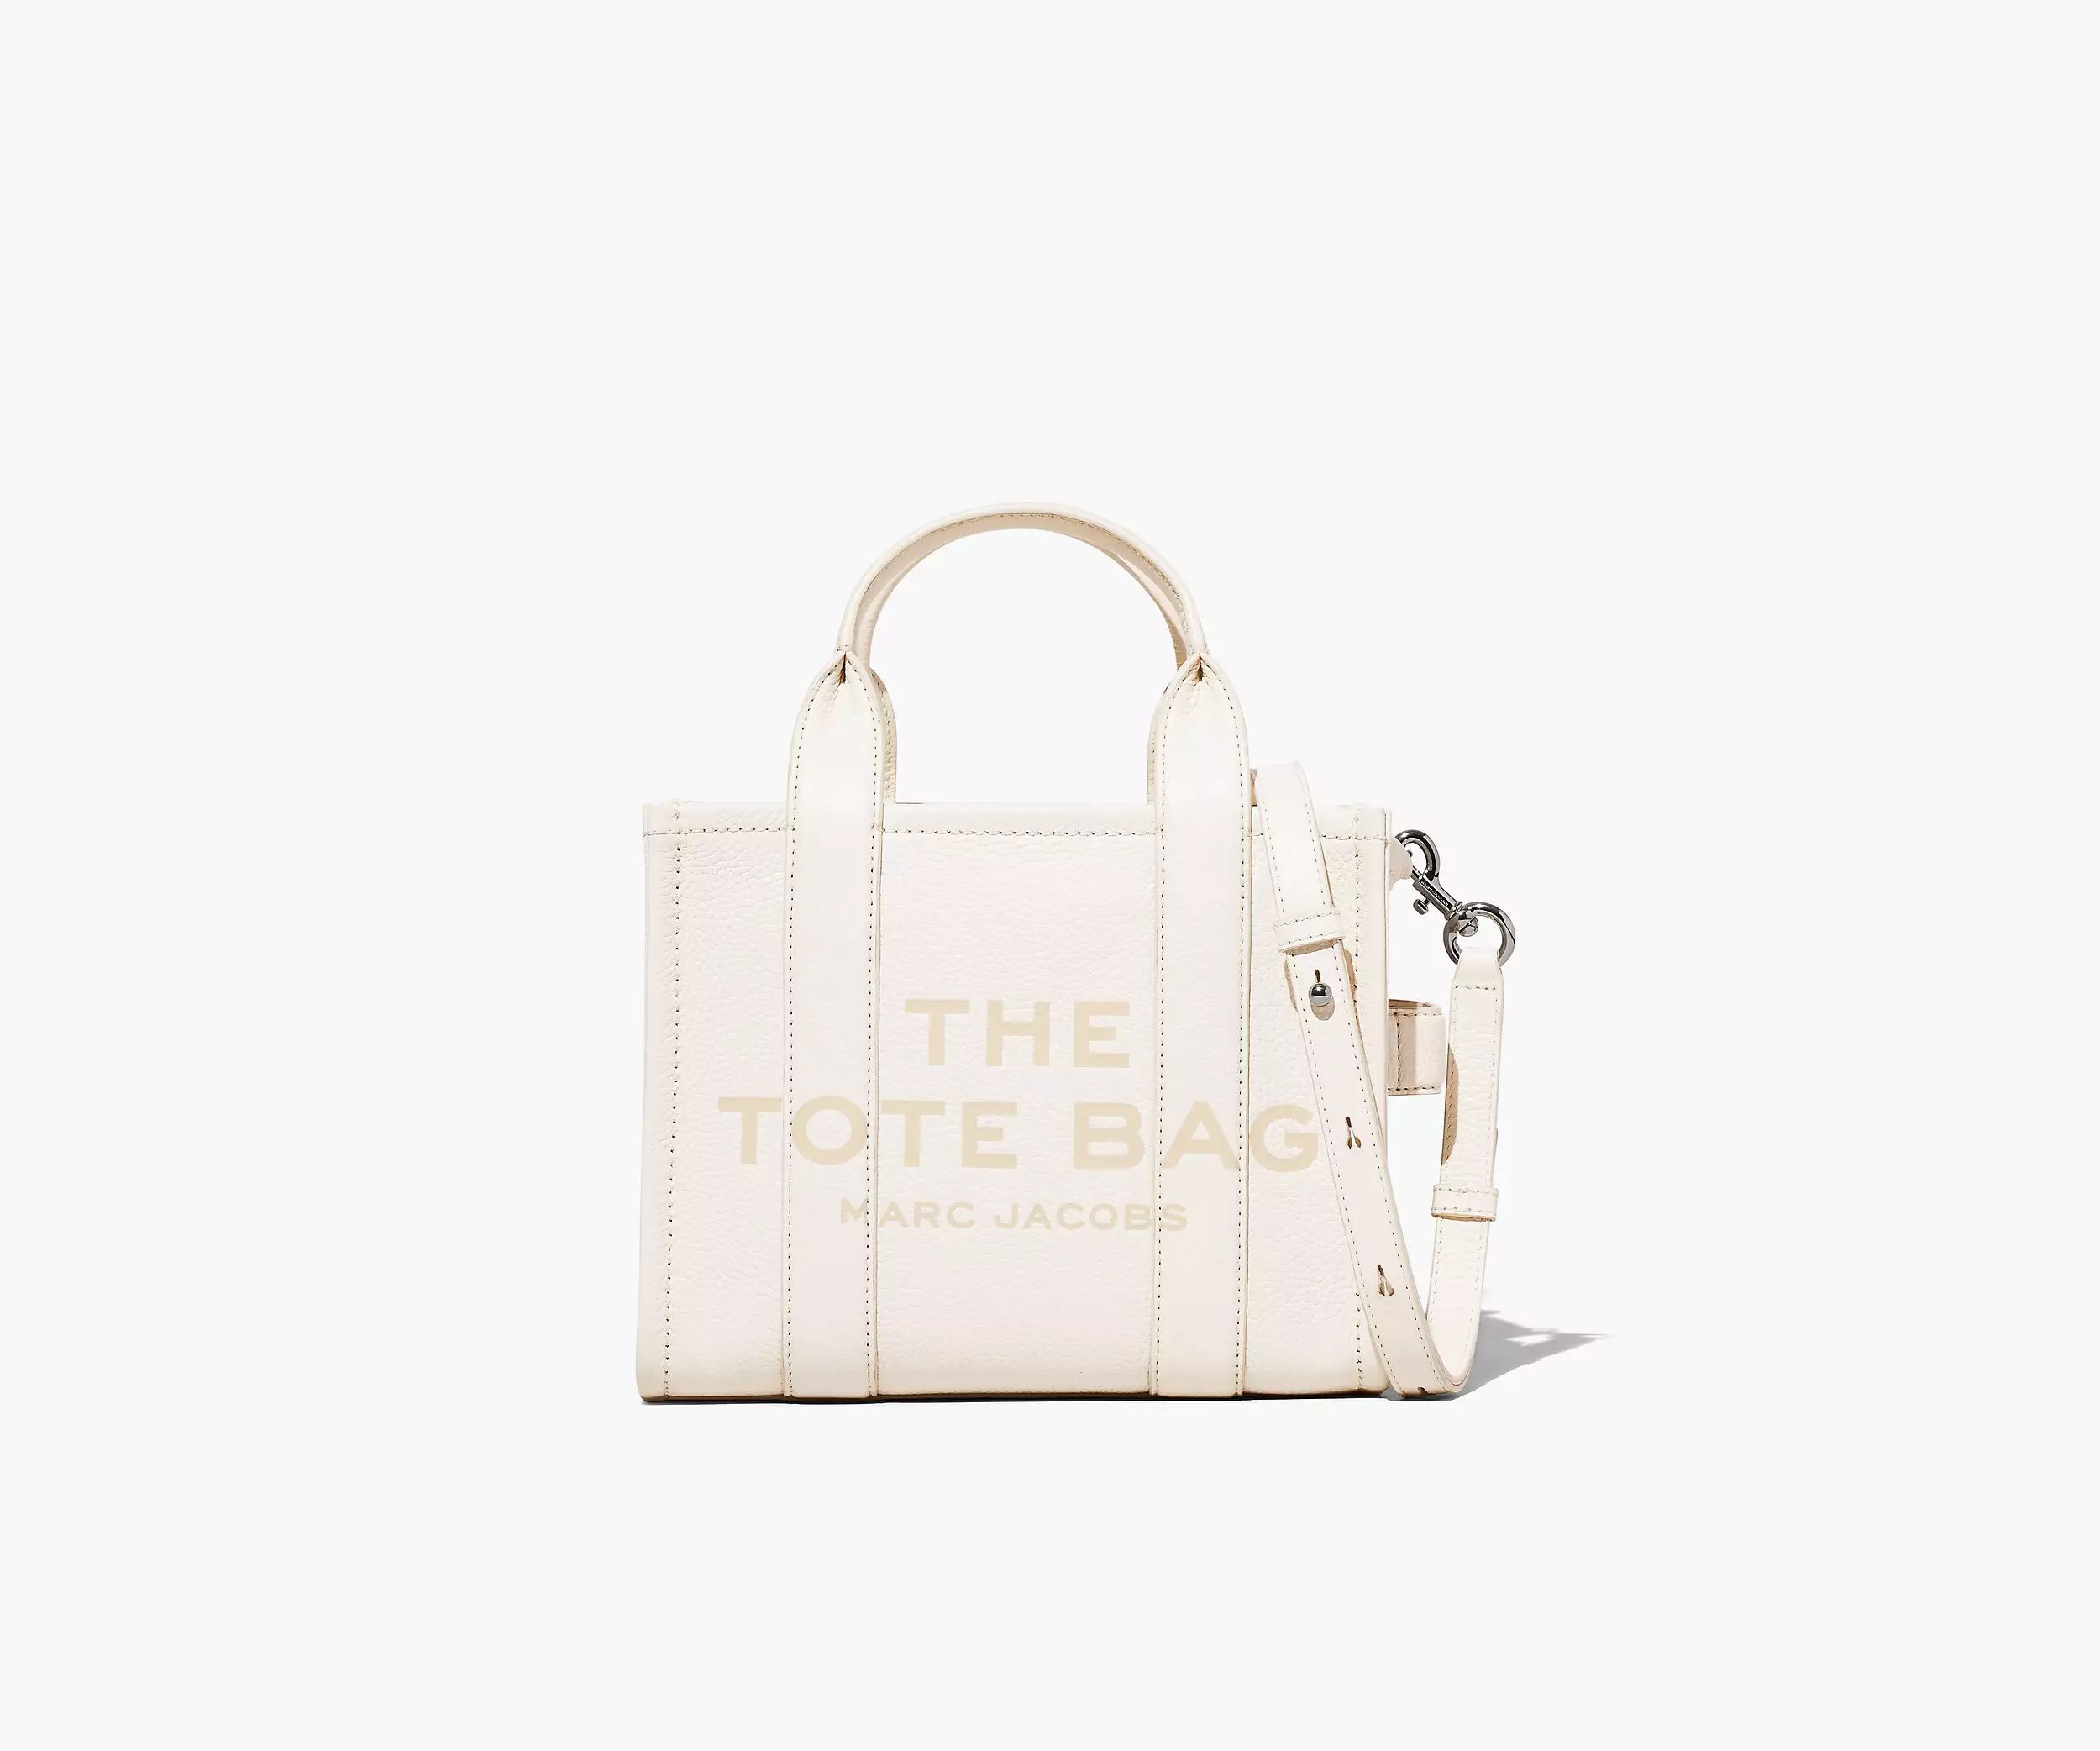 The Leather Small Tote Bag | Marc Jacobs